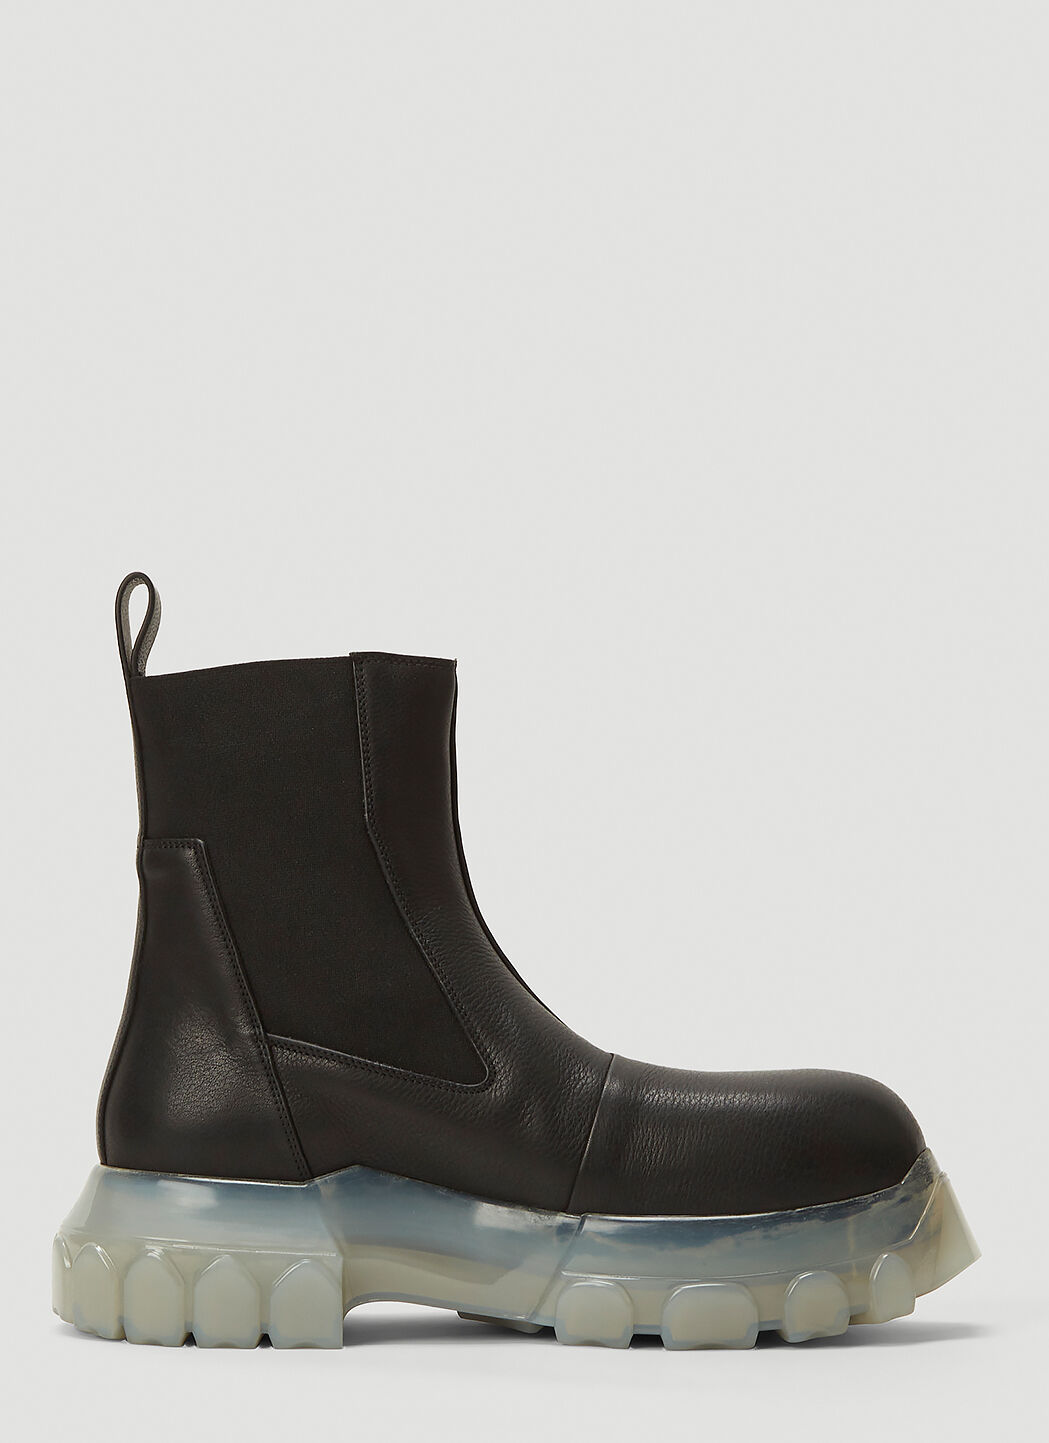 Rick Owens Bozo Tractor Beetle Boots in Black | LN-CC